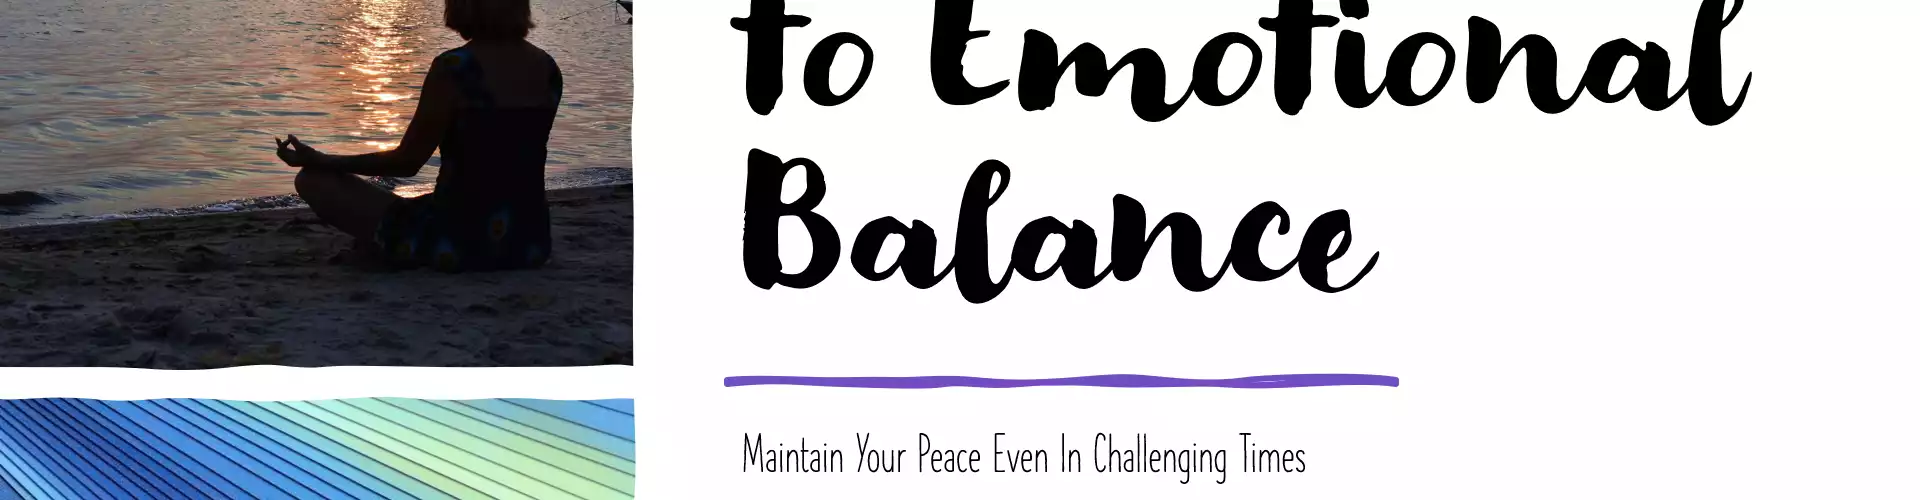 3 Easy Steps to Emotional Balance in Challenging Times